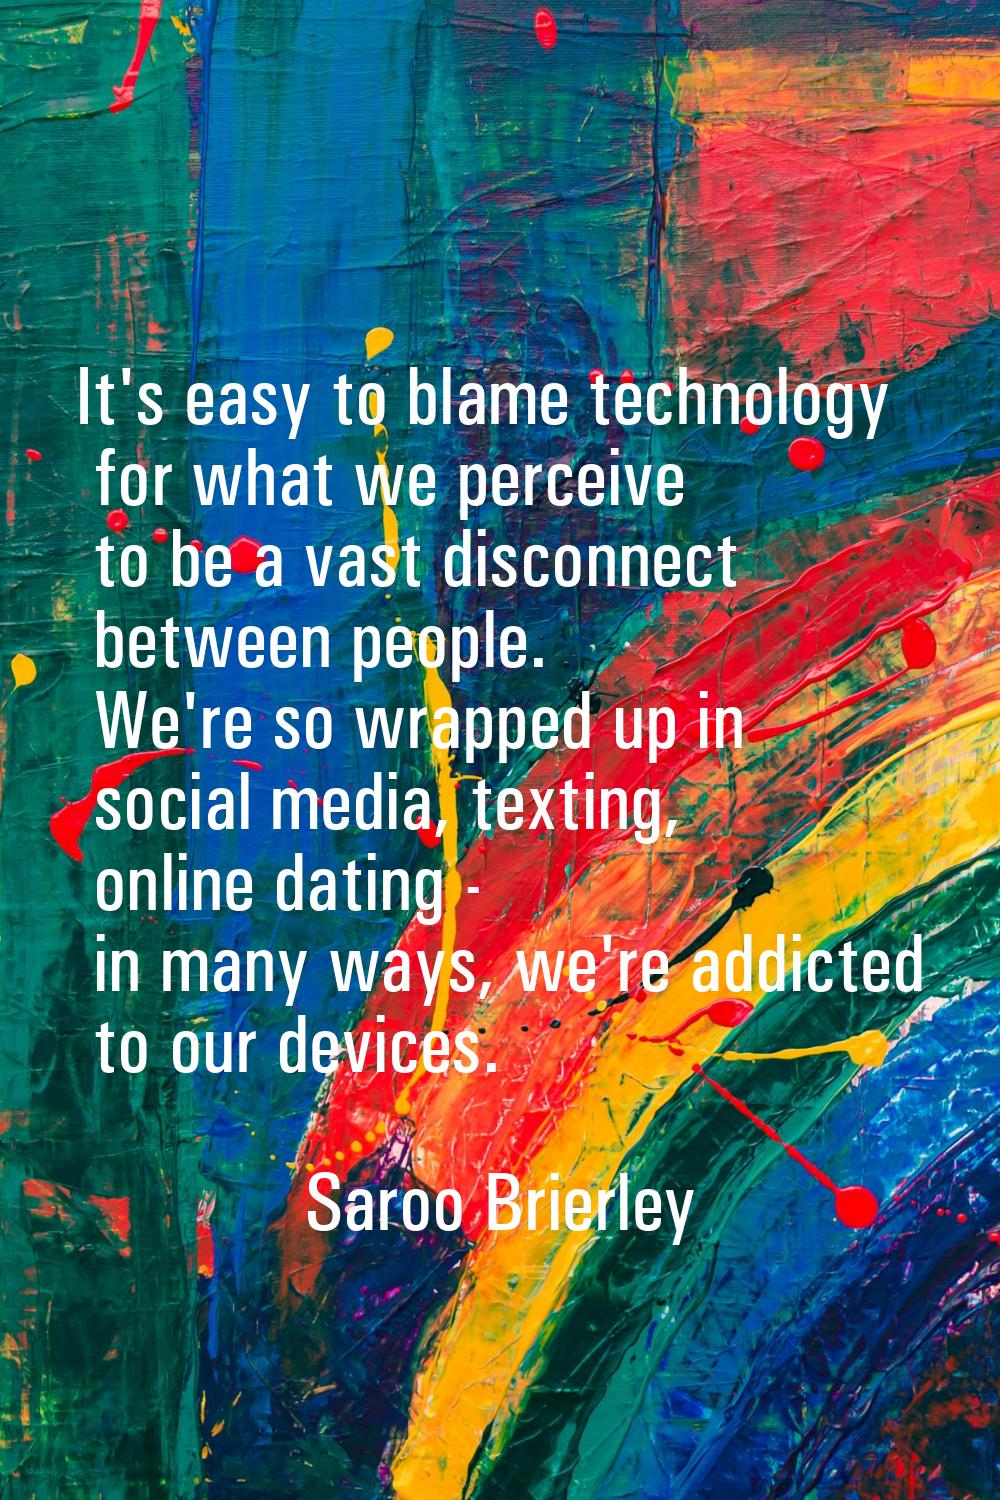 It's easy to blame technology for what we perceive to be a vast disconnect between people. We're so